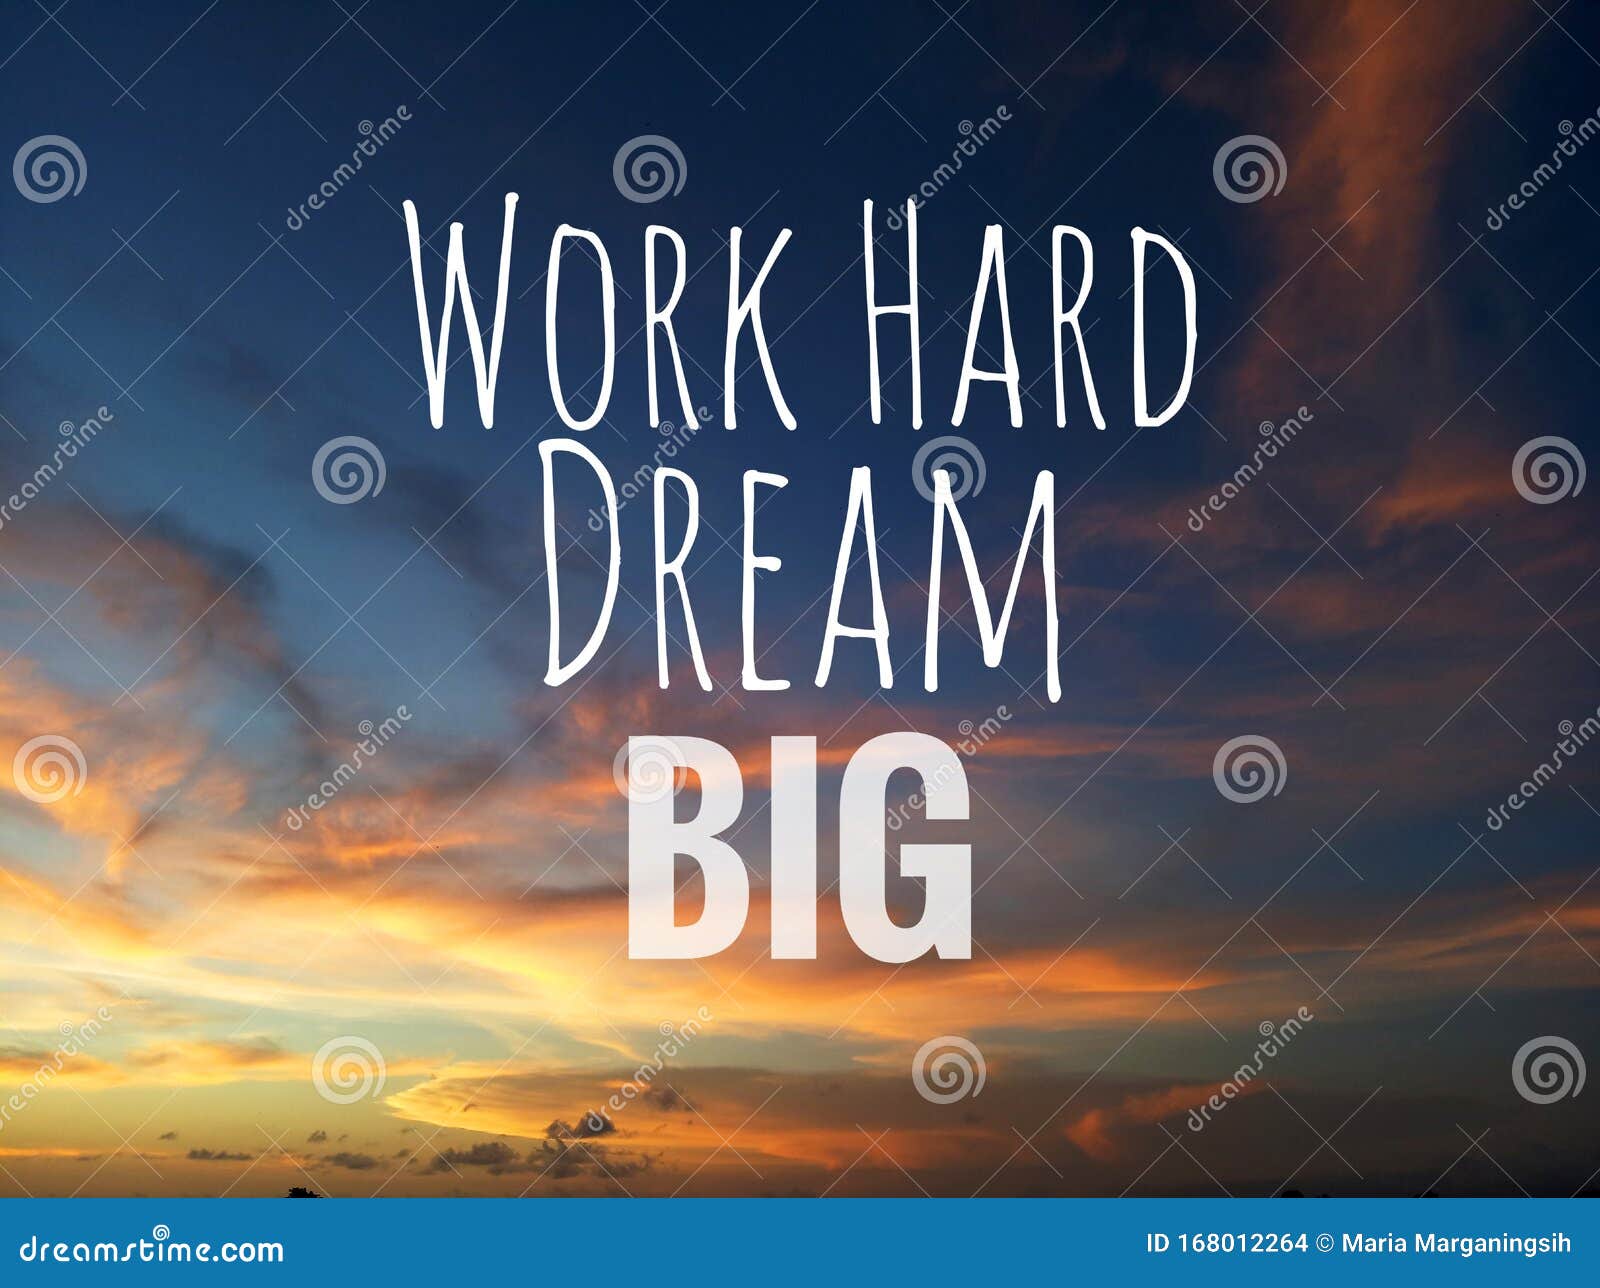 inspirational motivational quote - work hard, dream big. with blurry background of dramatic and colorful sky clouds view.